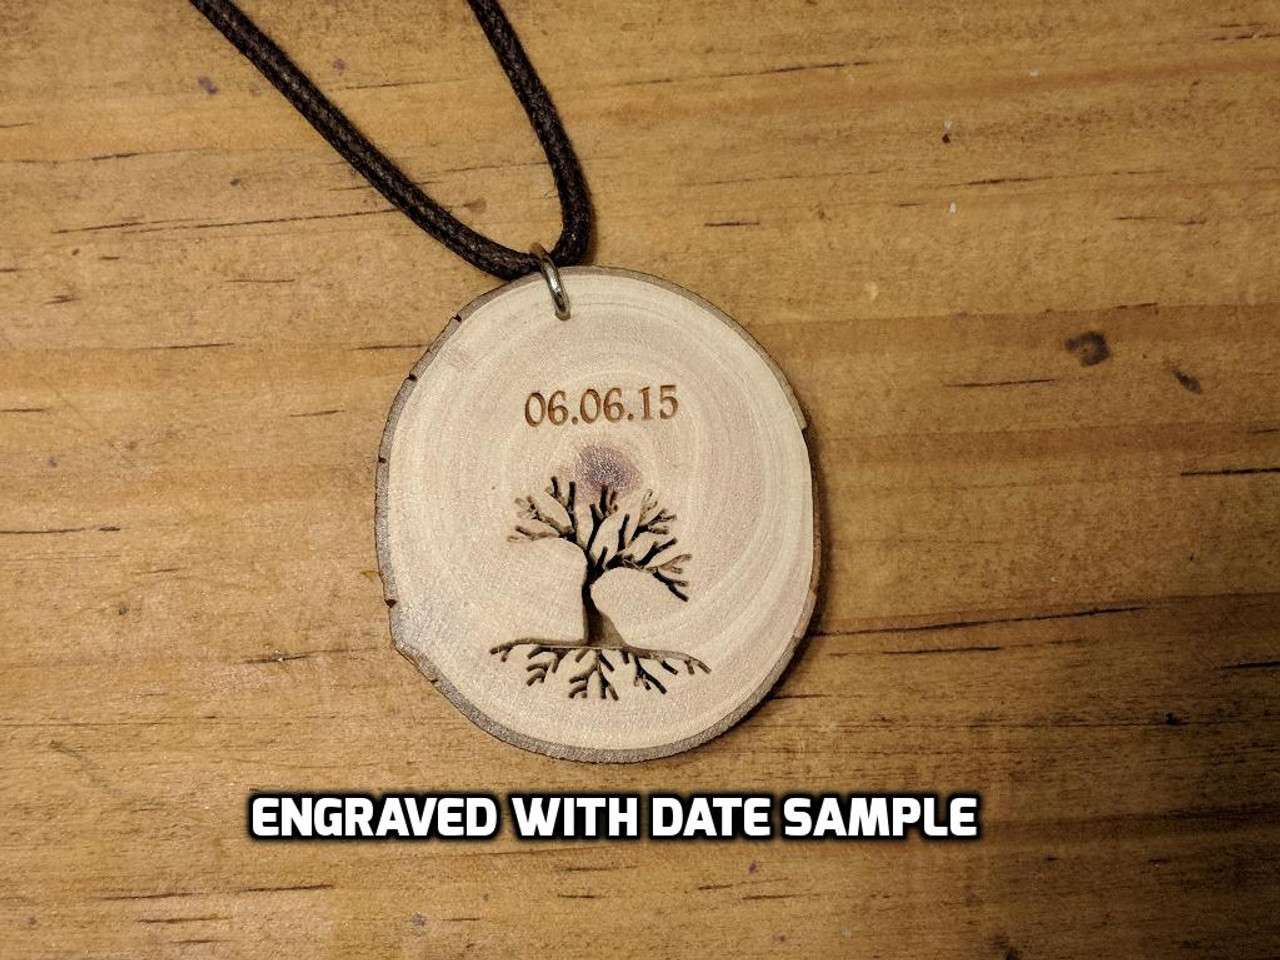 ENGRAVED WITH DATE SAMPLE